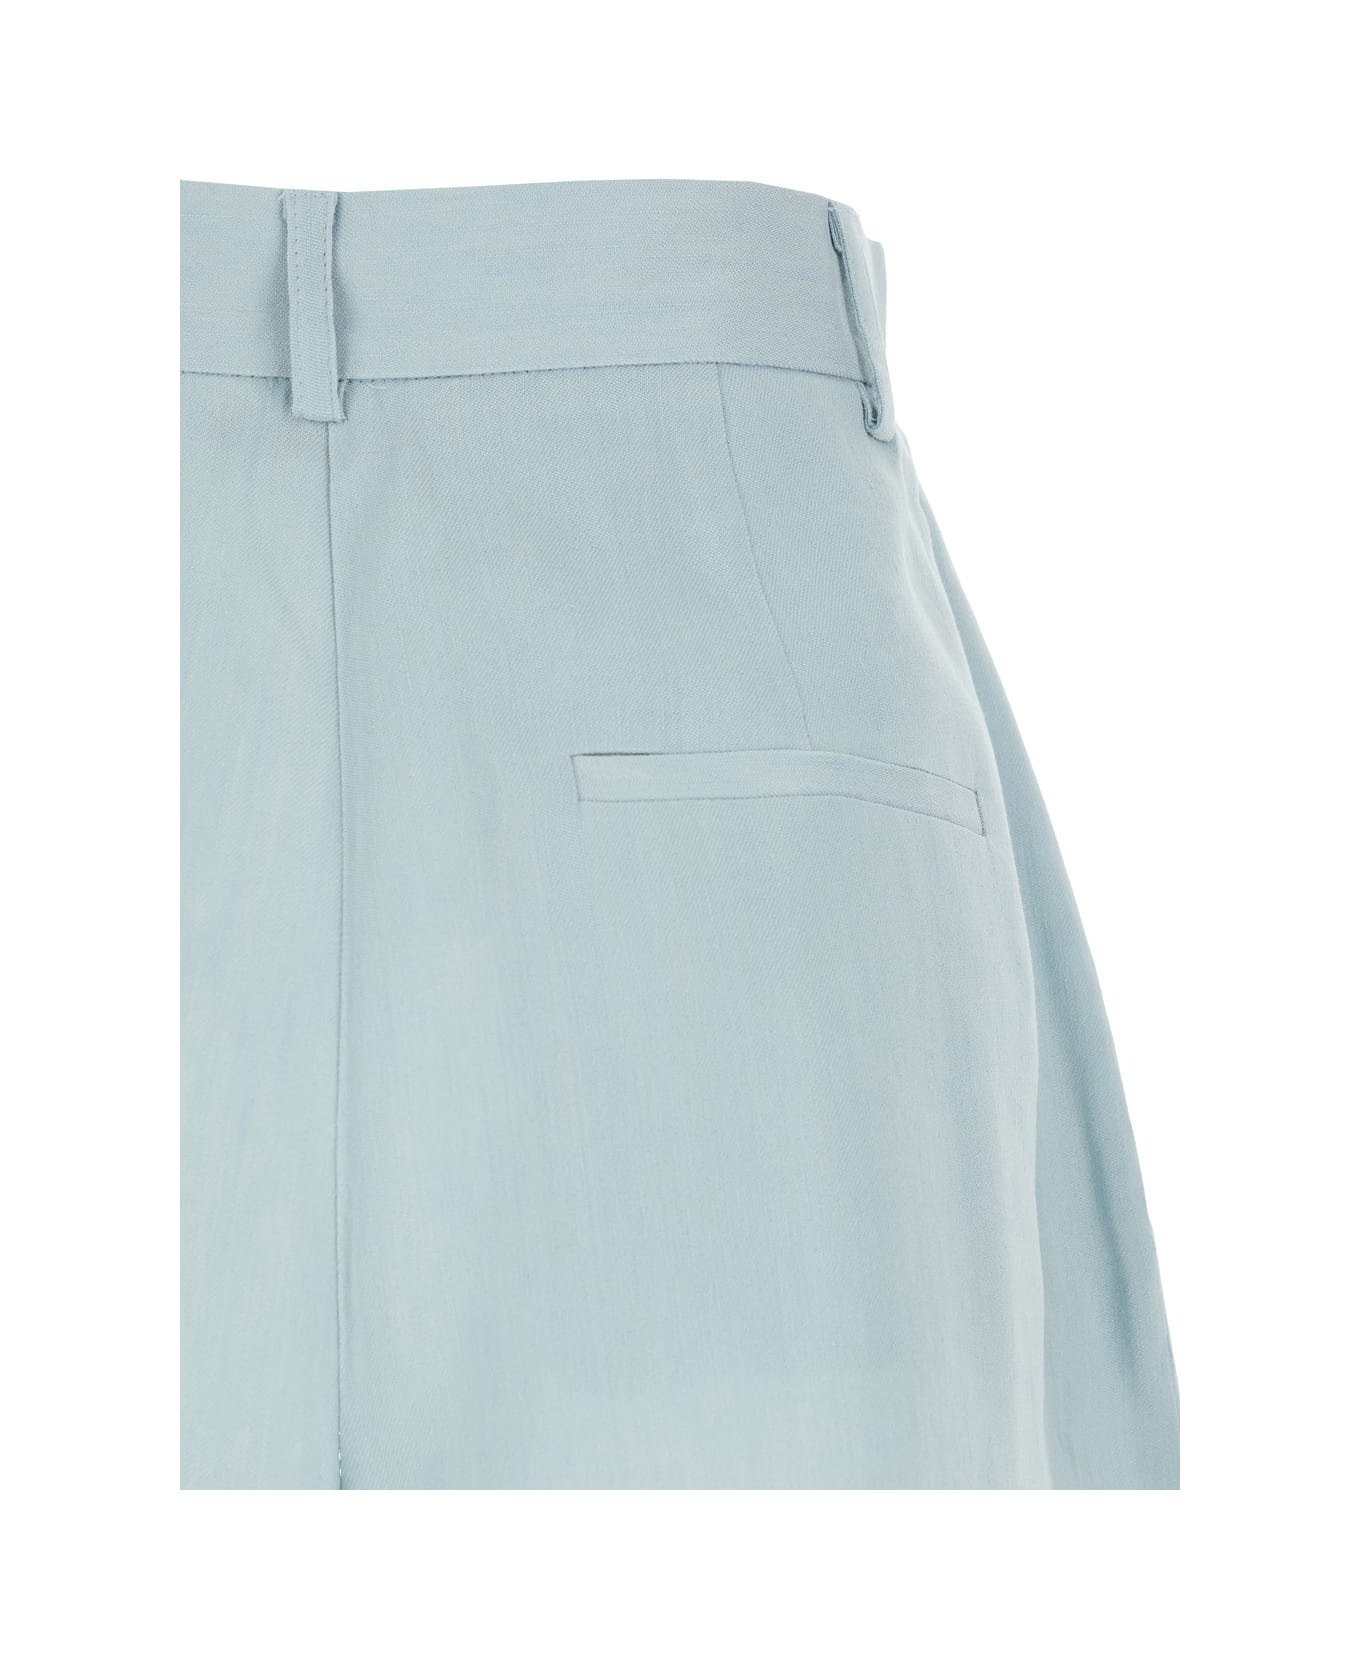 The Andamane Light Blue Shorts With Pinces In Linen Blend Woman - Blu ショートパンツ